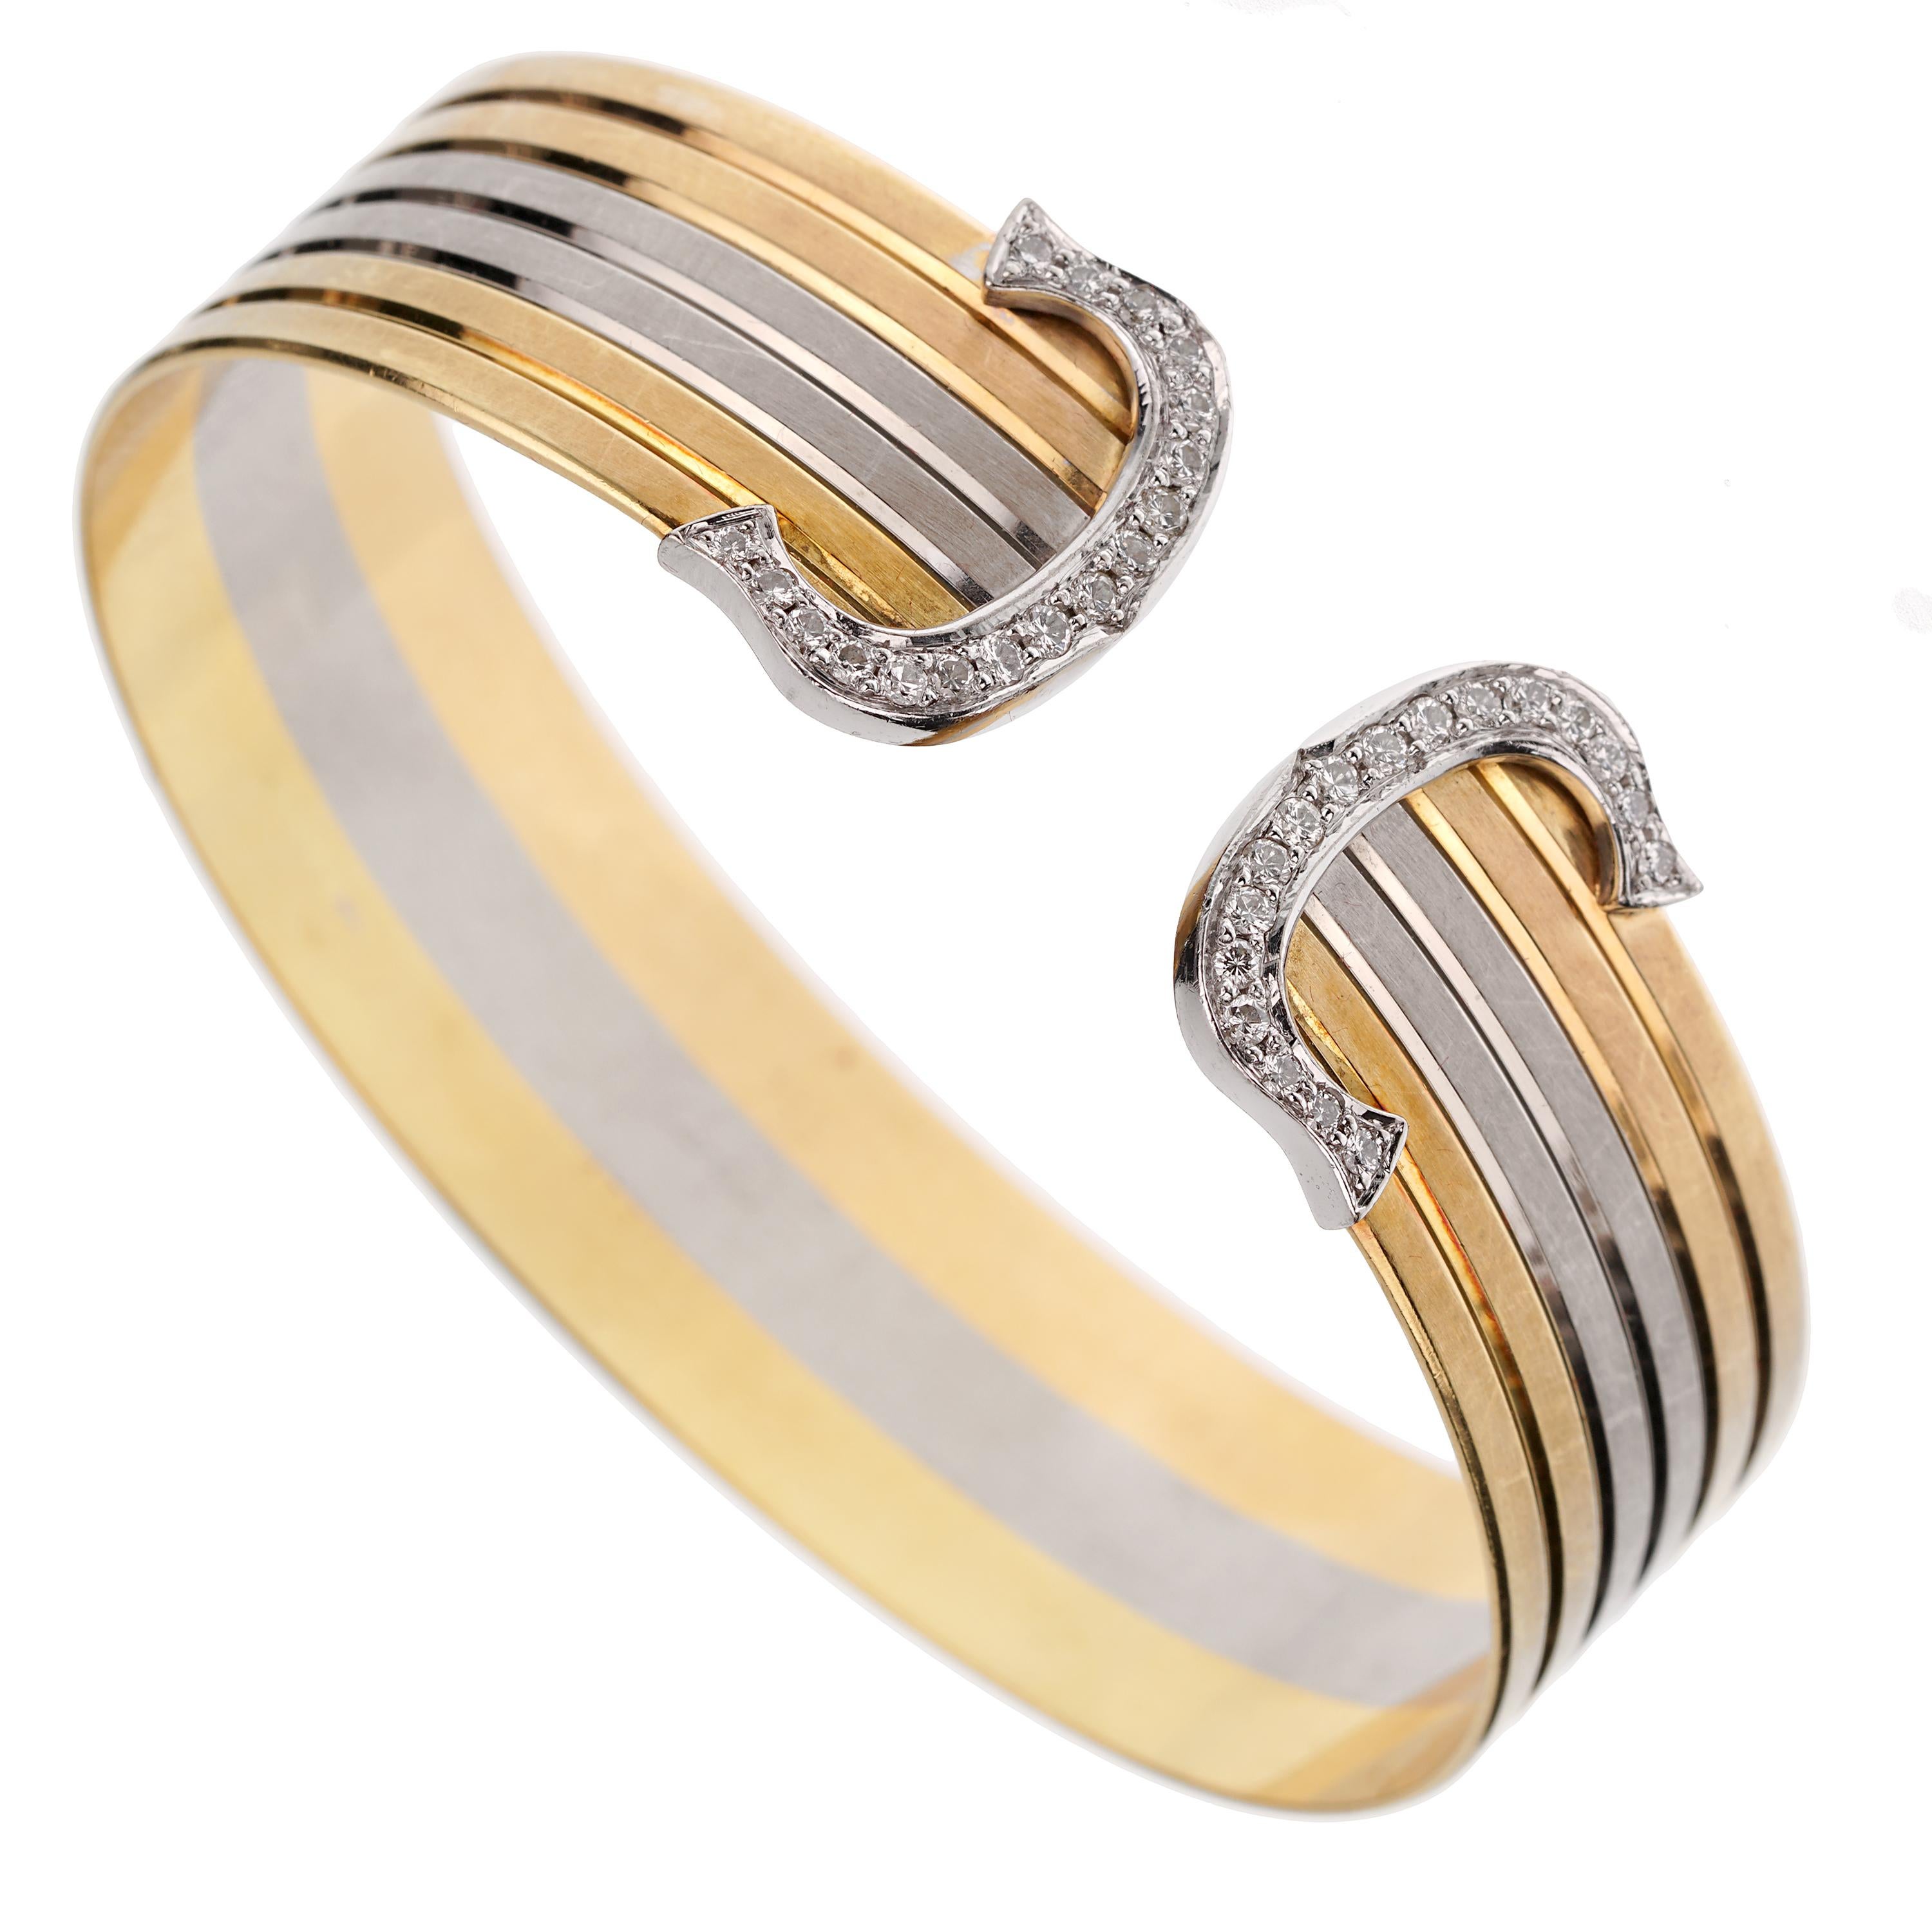 This Cartier Double C Vintage Diamond Cuff Tri-Color Bangle Bracelet embodies the quintessence of elegance and the celebrated craftsmanship of the renowned French jewelry maker, Cartier. A timeless piece from their collection, this bracelet is a